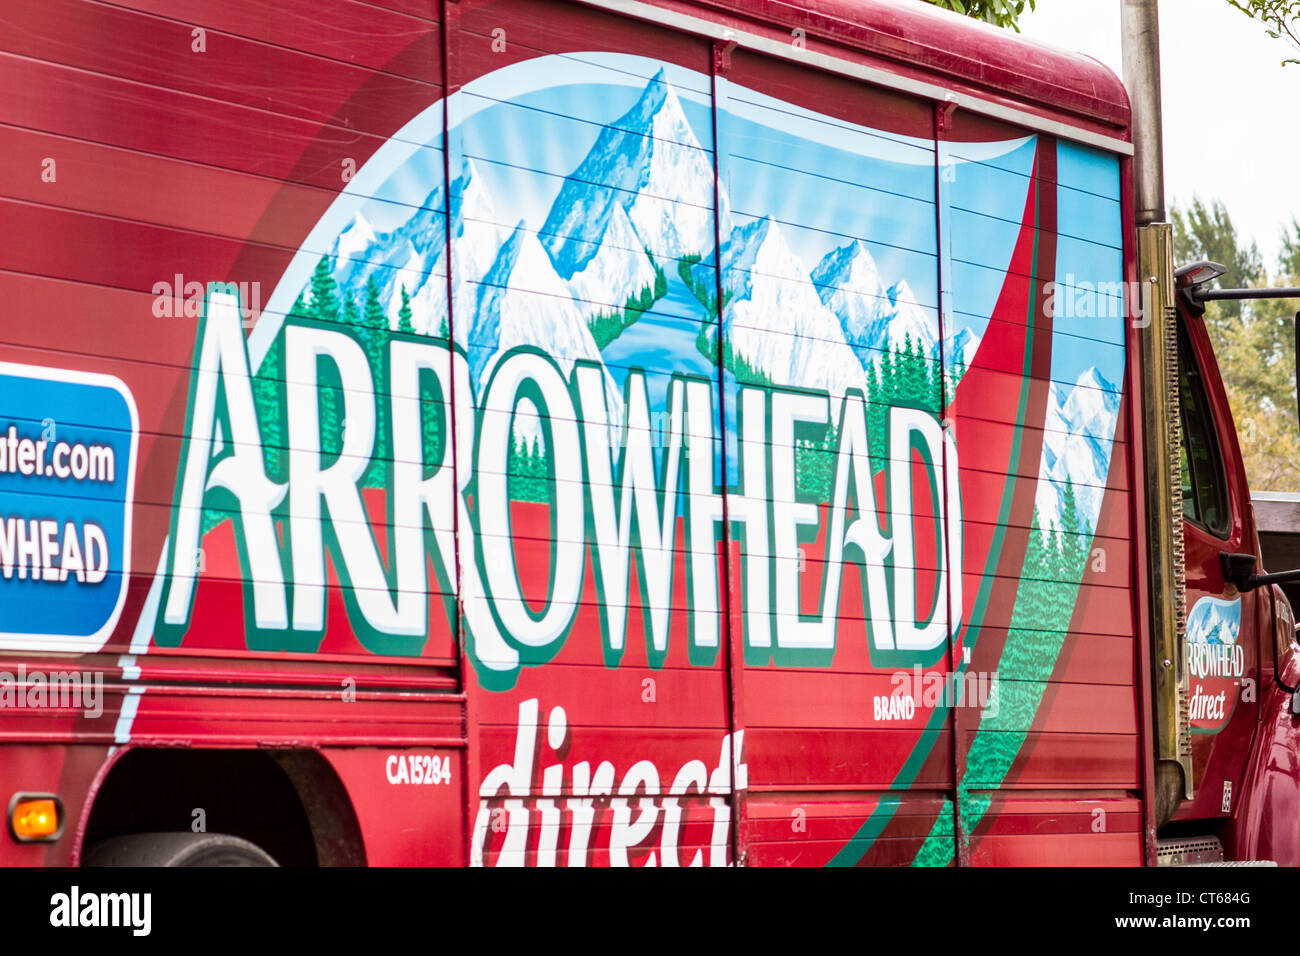 An Arrowhead water delivery truck Stock Photo